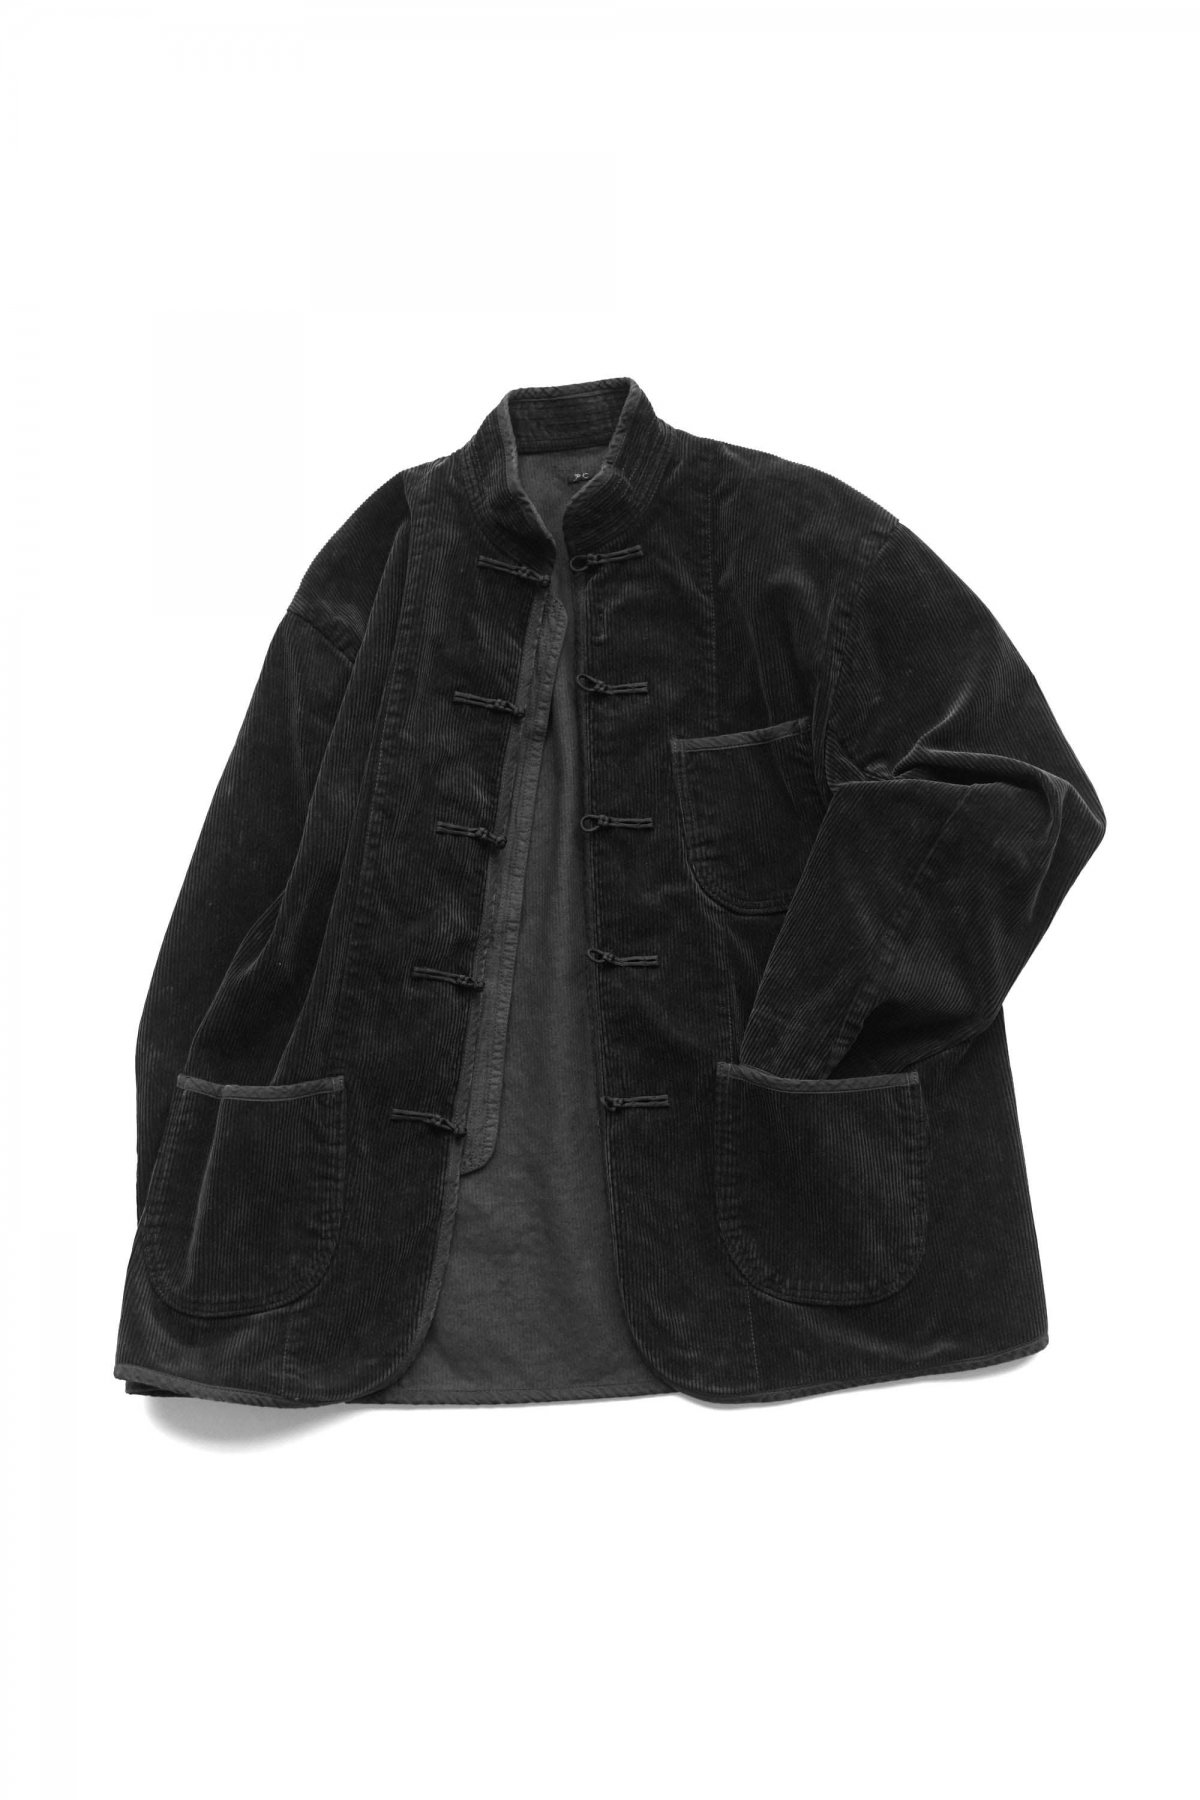 Porter Classic - CORDUROY CHINESE JACKET - WATCH CHAIN 